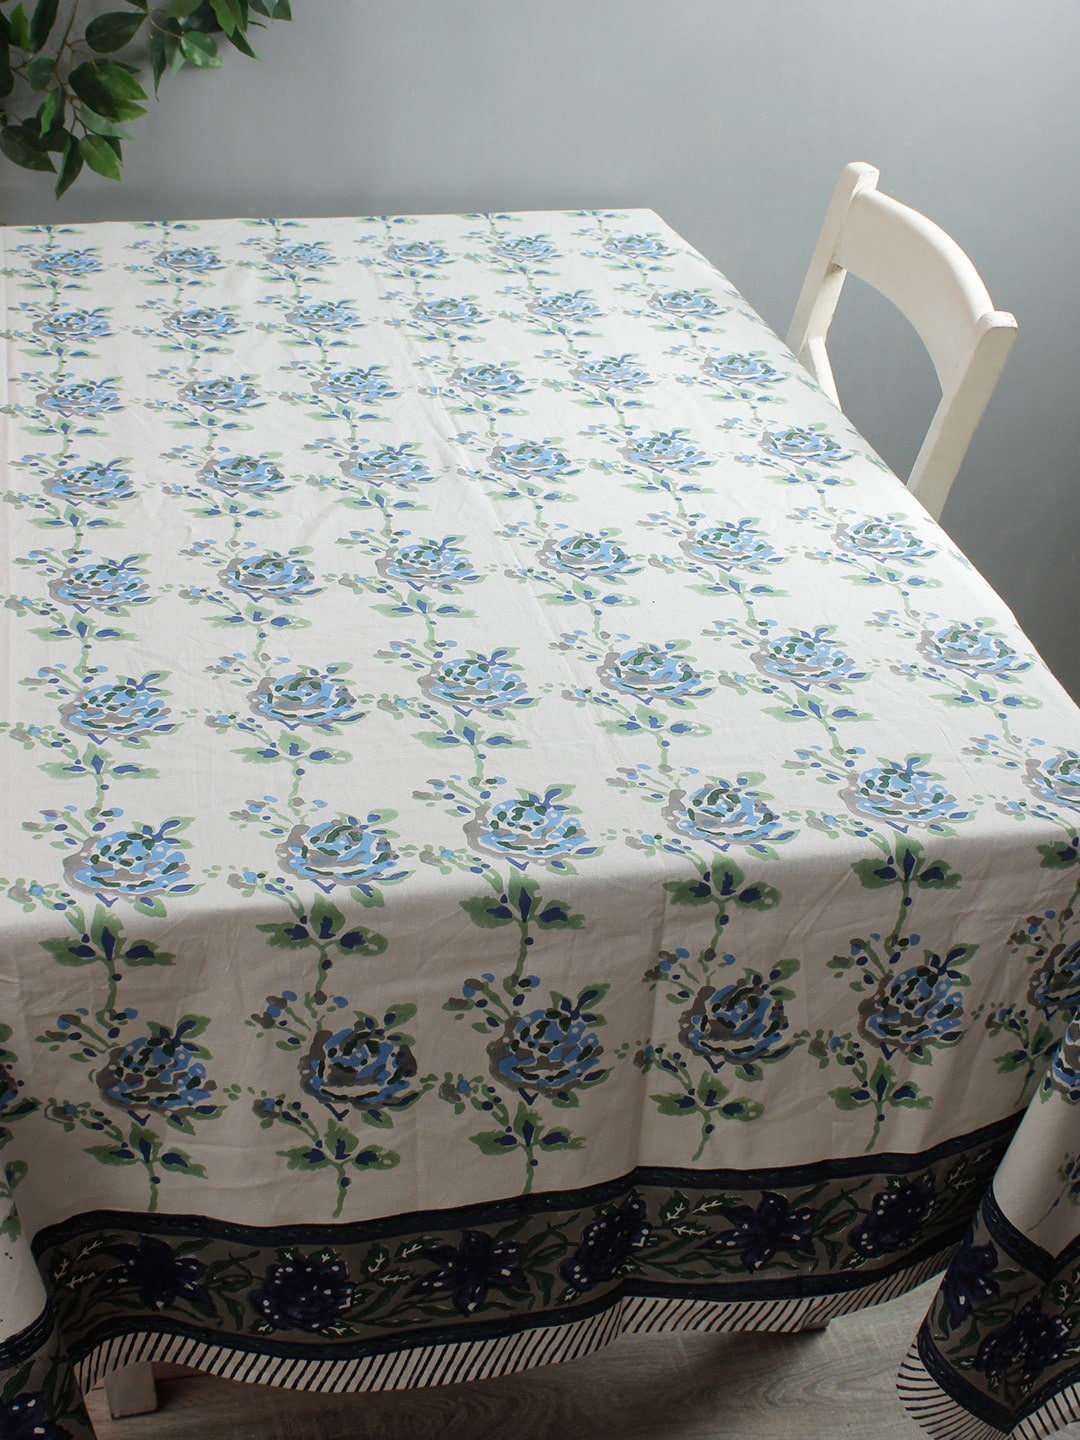 Rajasthan Decor White & Blue Floral Printed Sustainable Table Cover Price in India